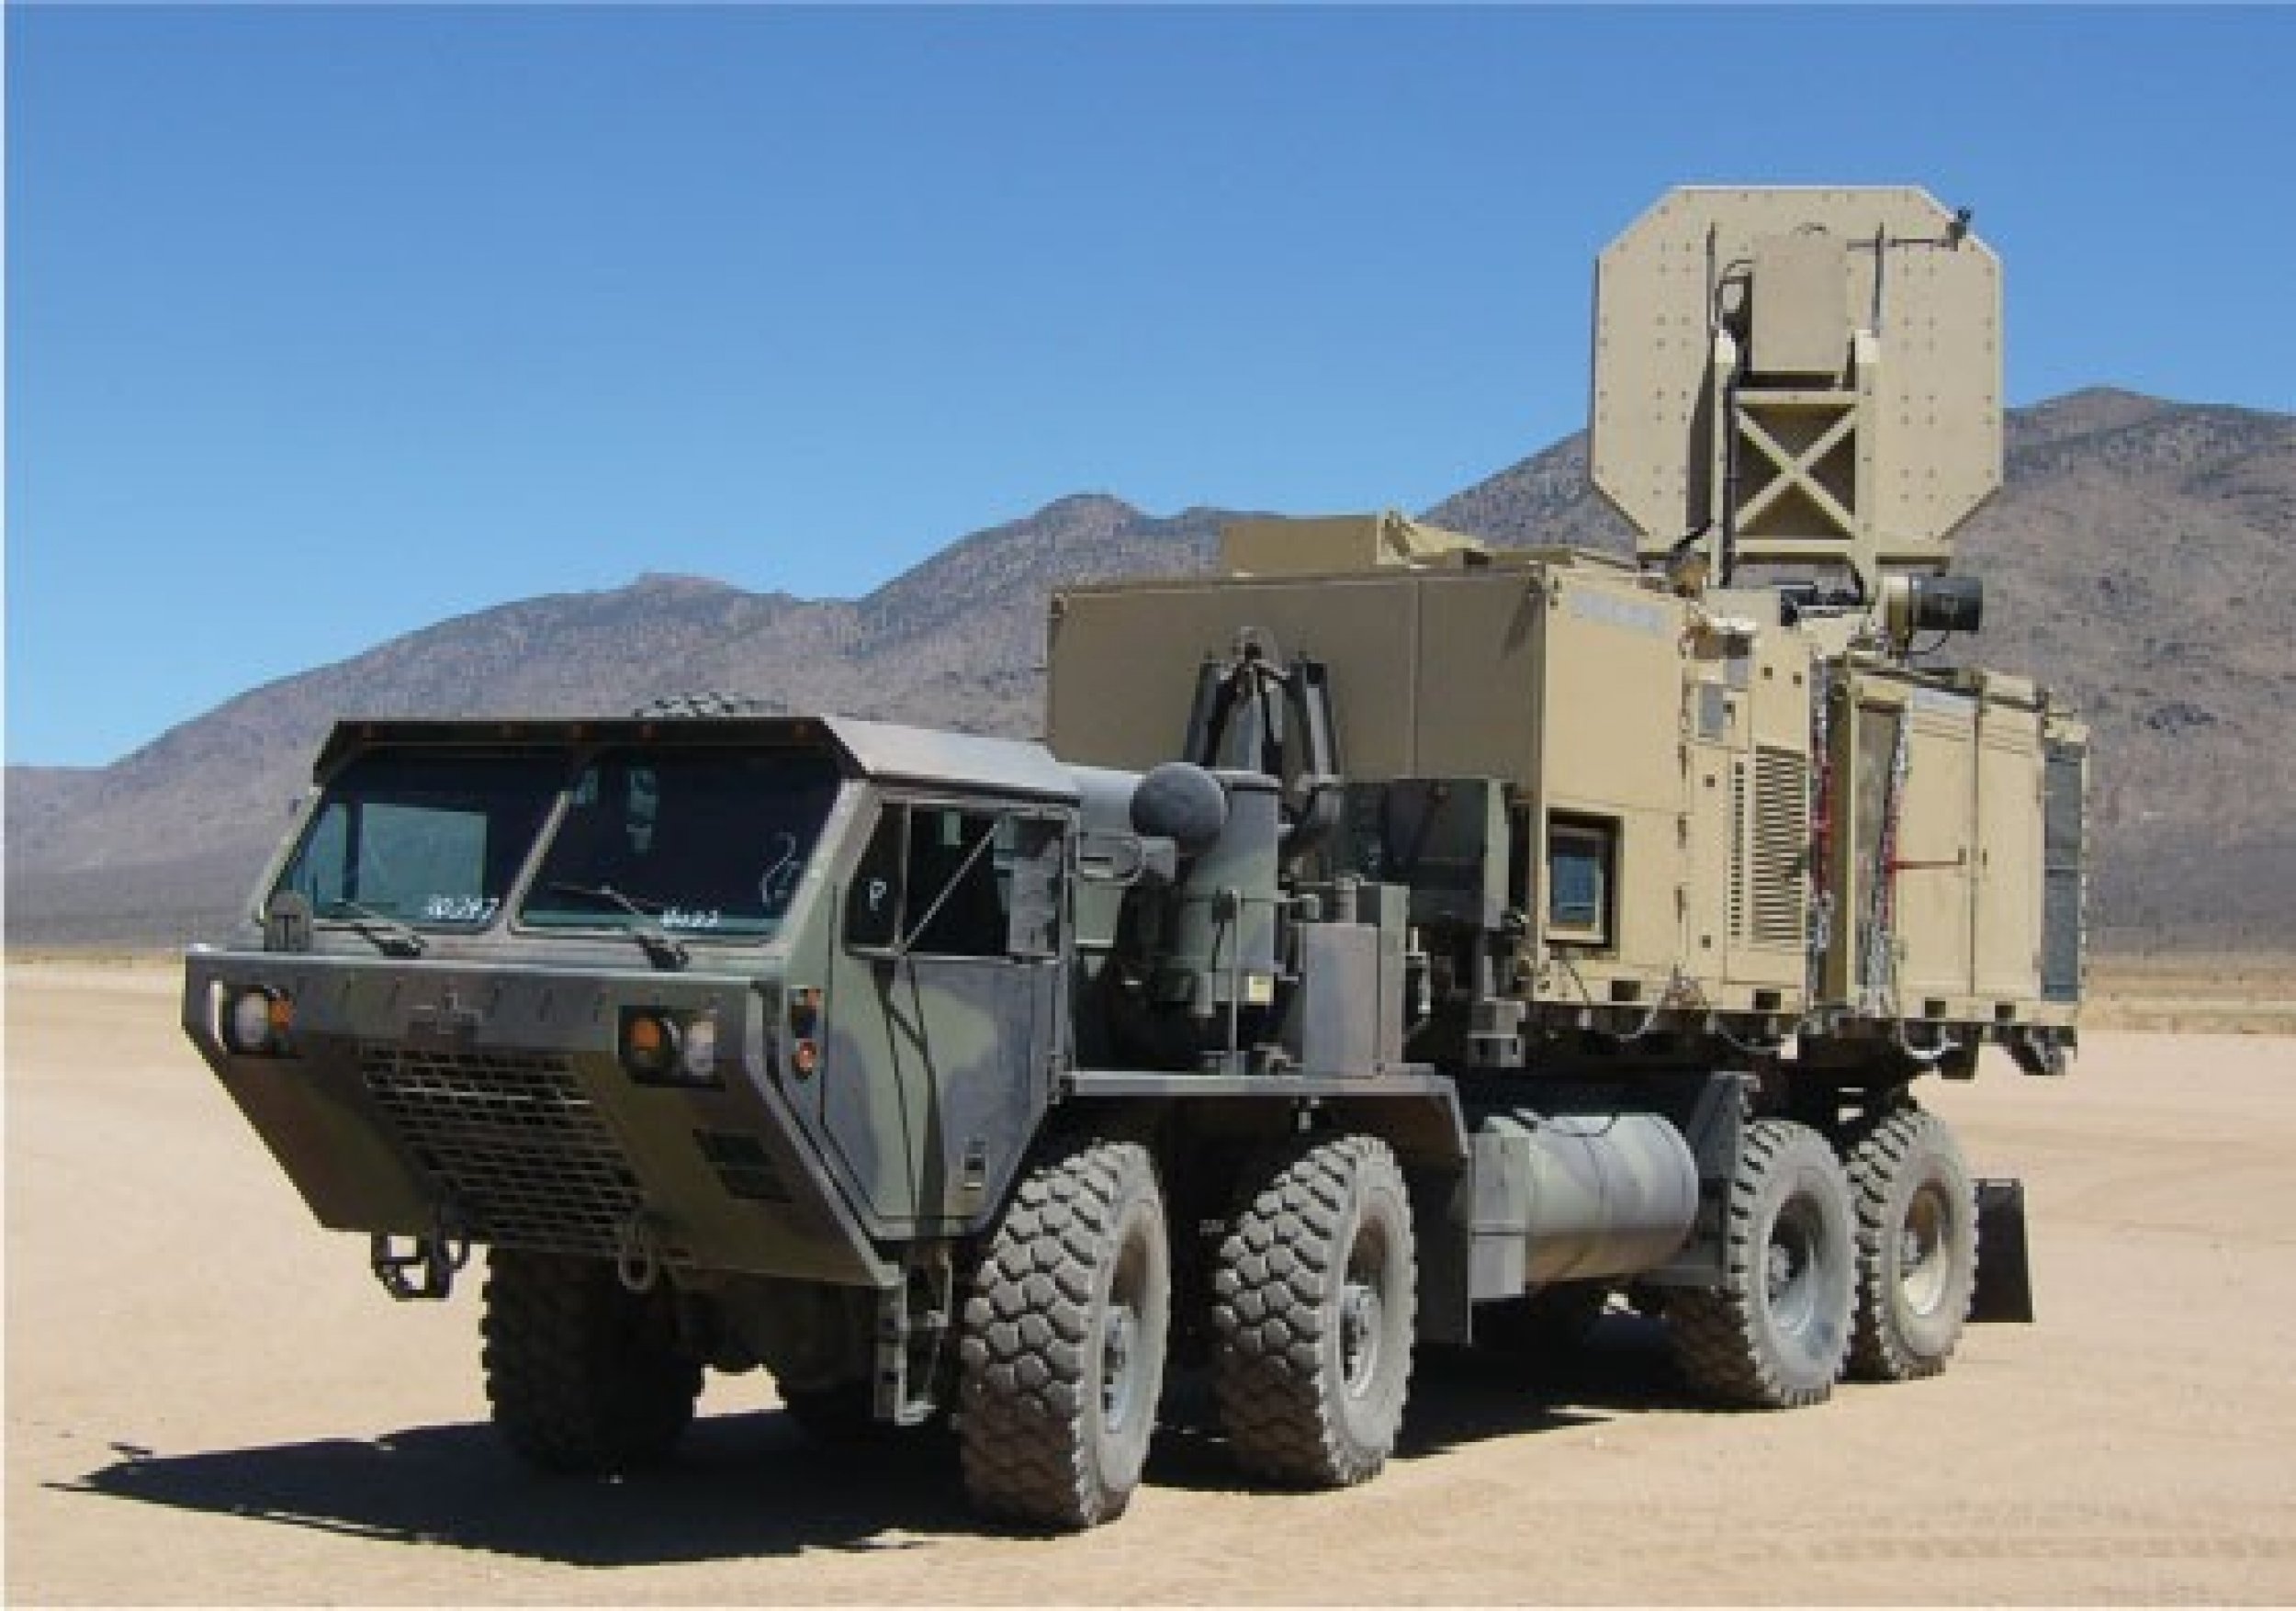 An active denial system mounted atop a military vehicle